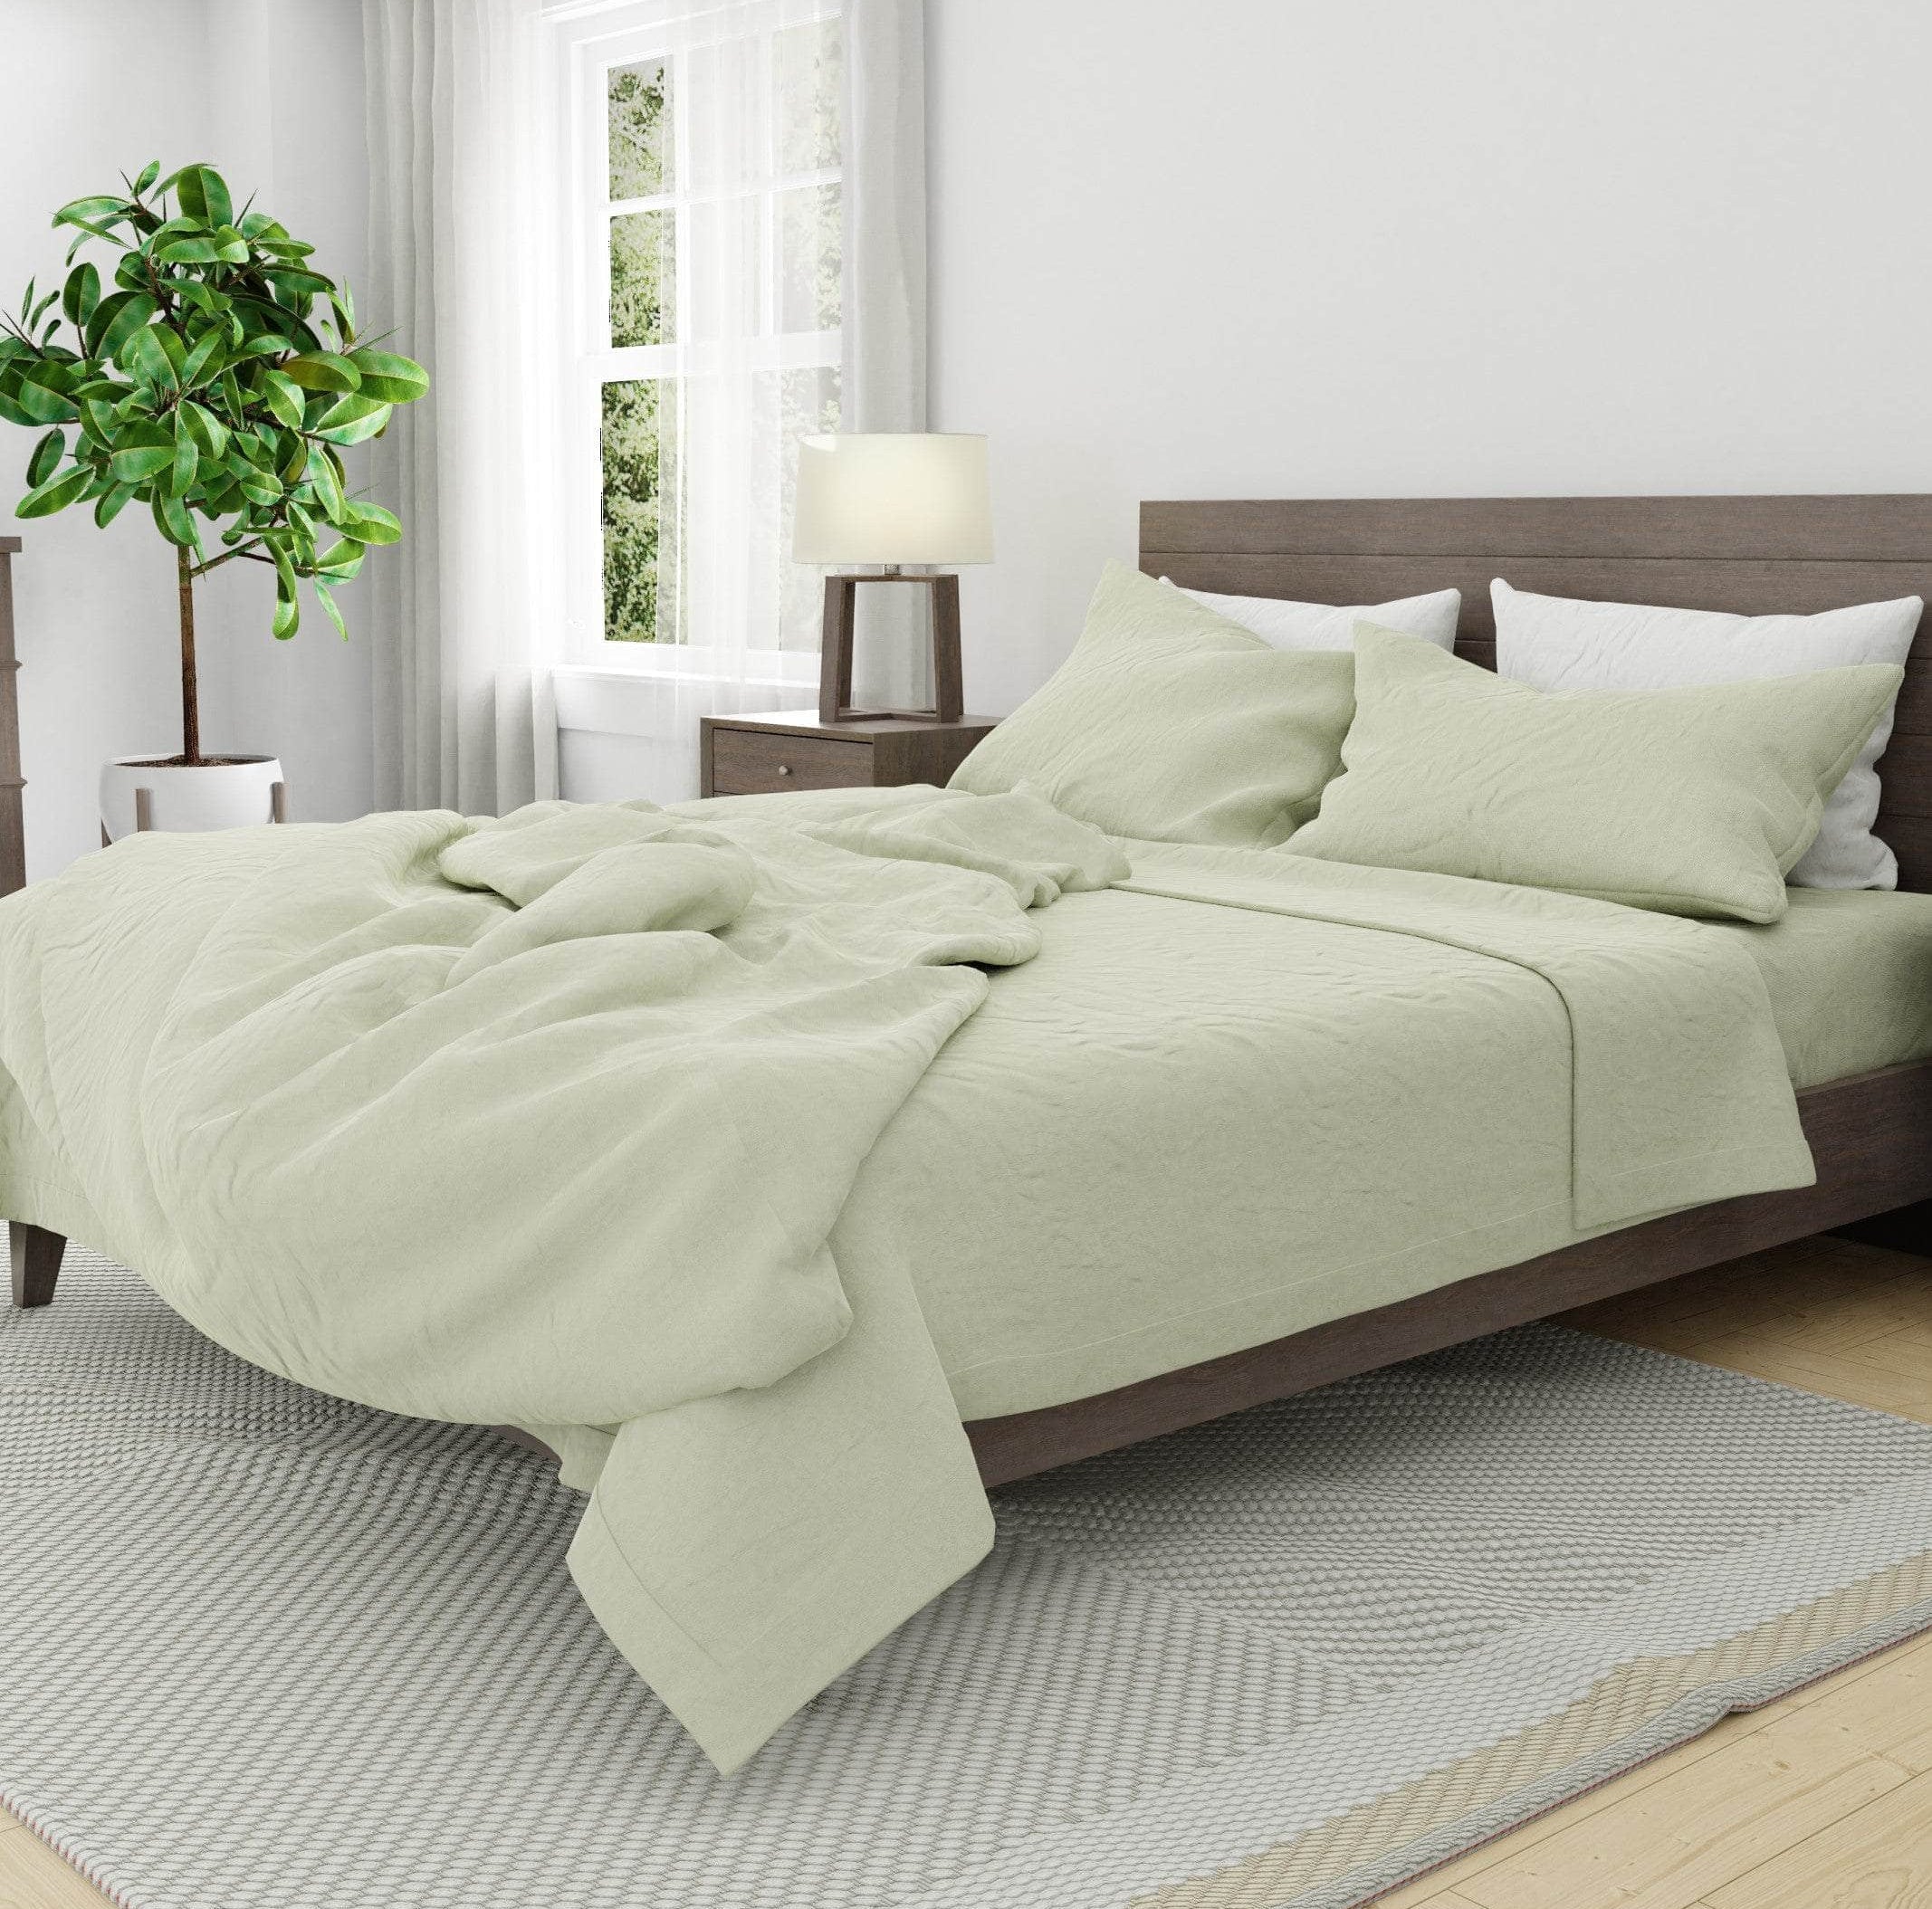 Bed with Linen Duvet Cover in Seafoam and Linen Pillowcases in White